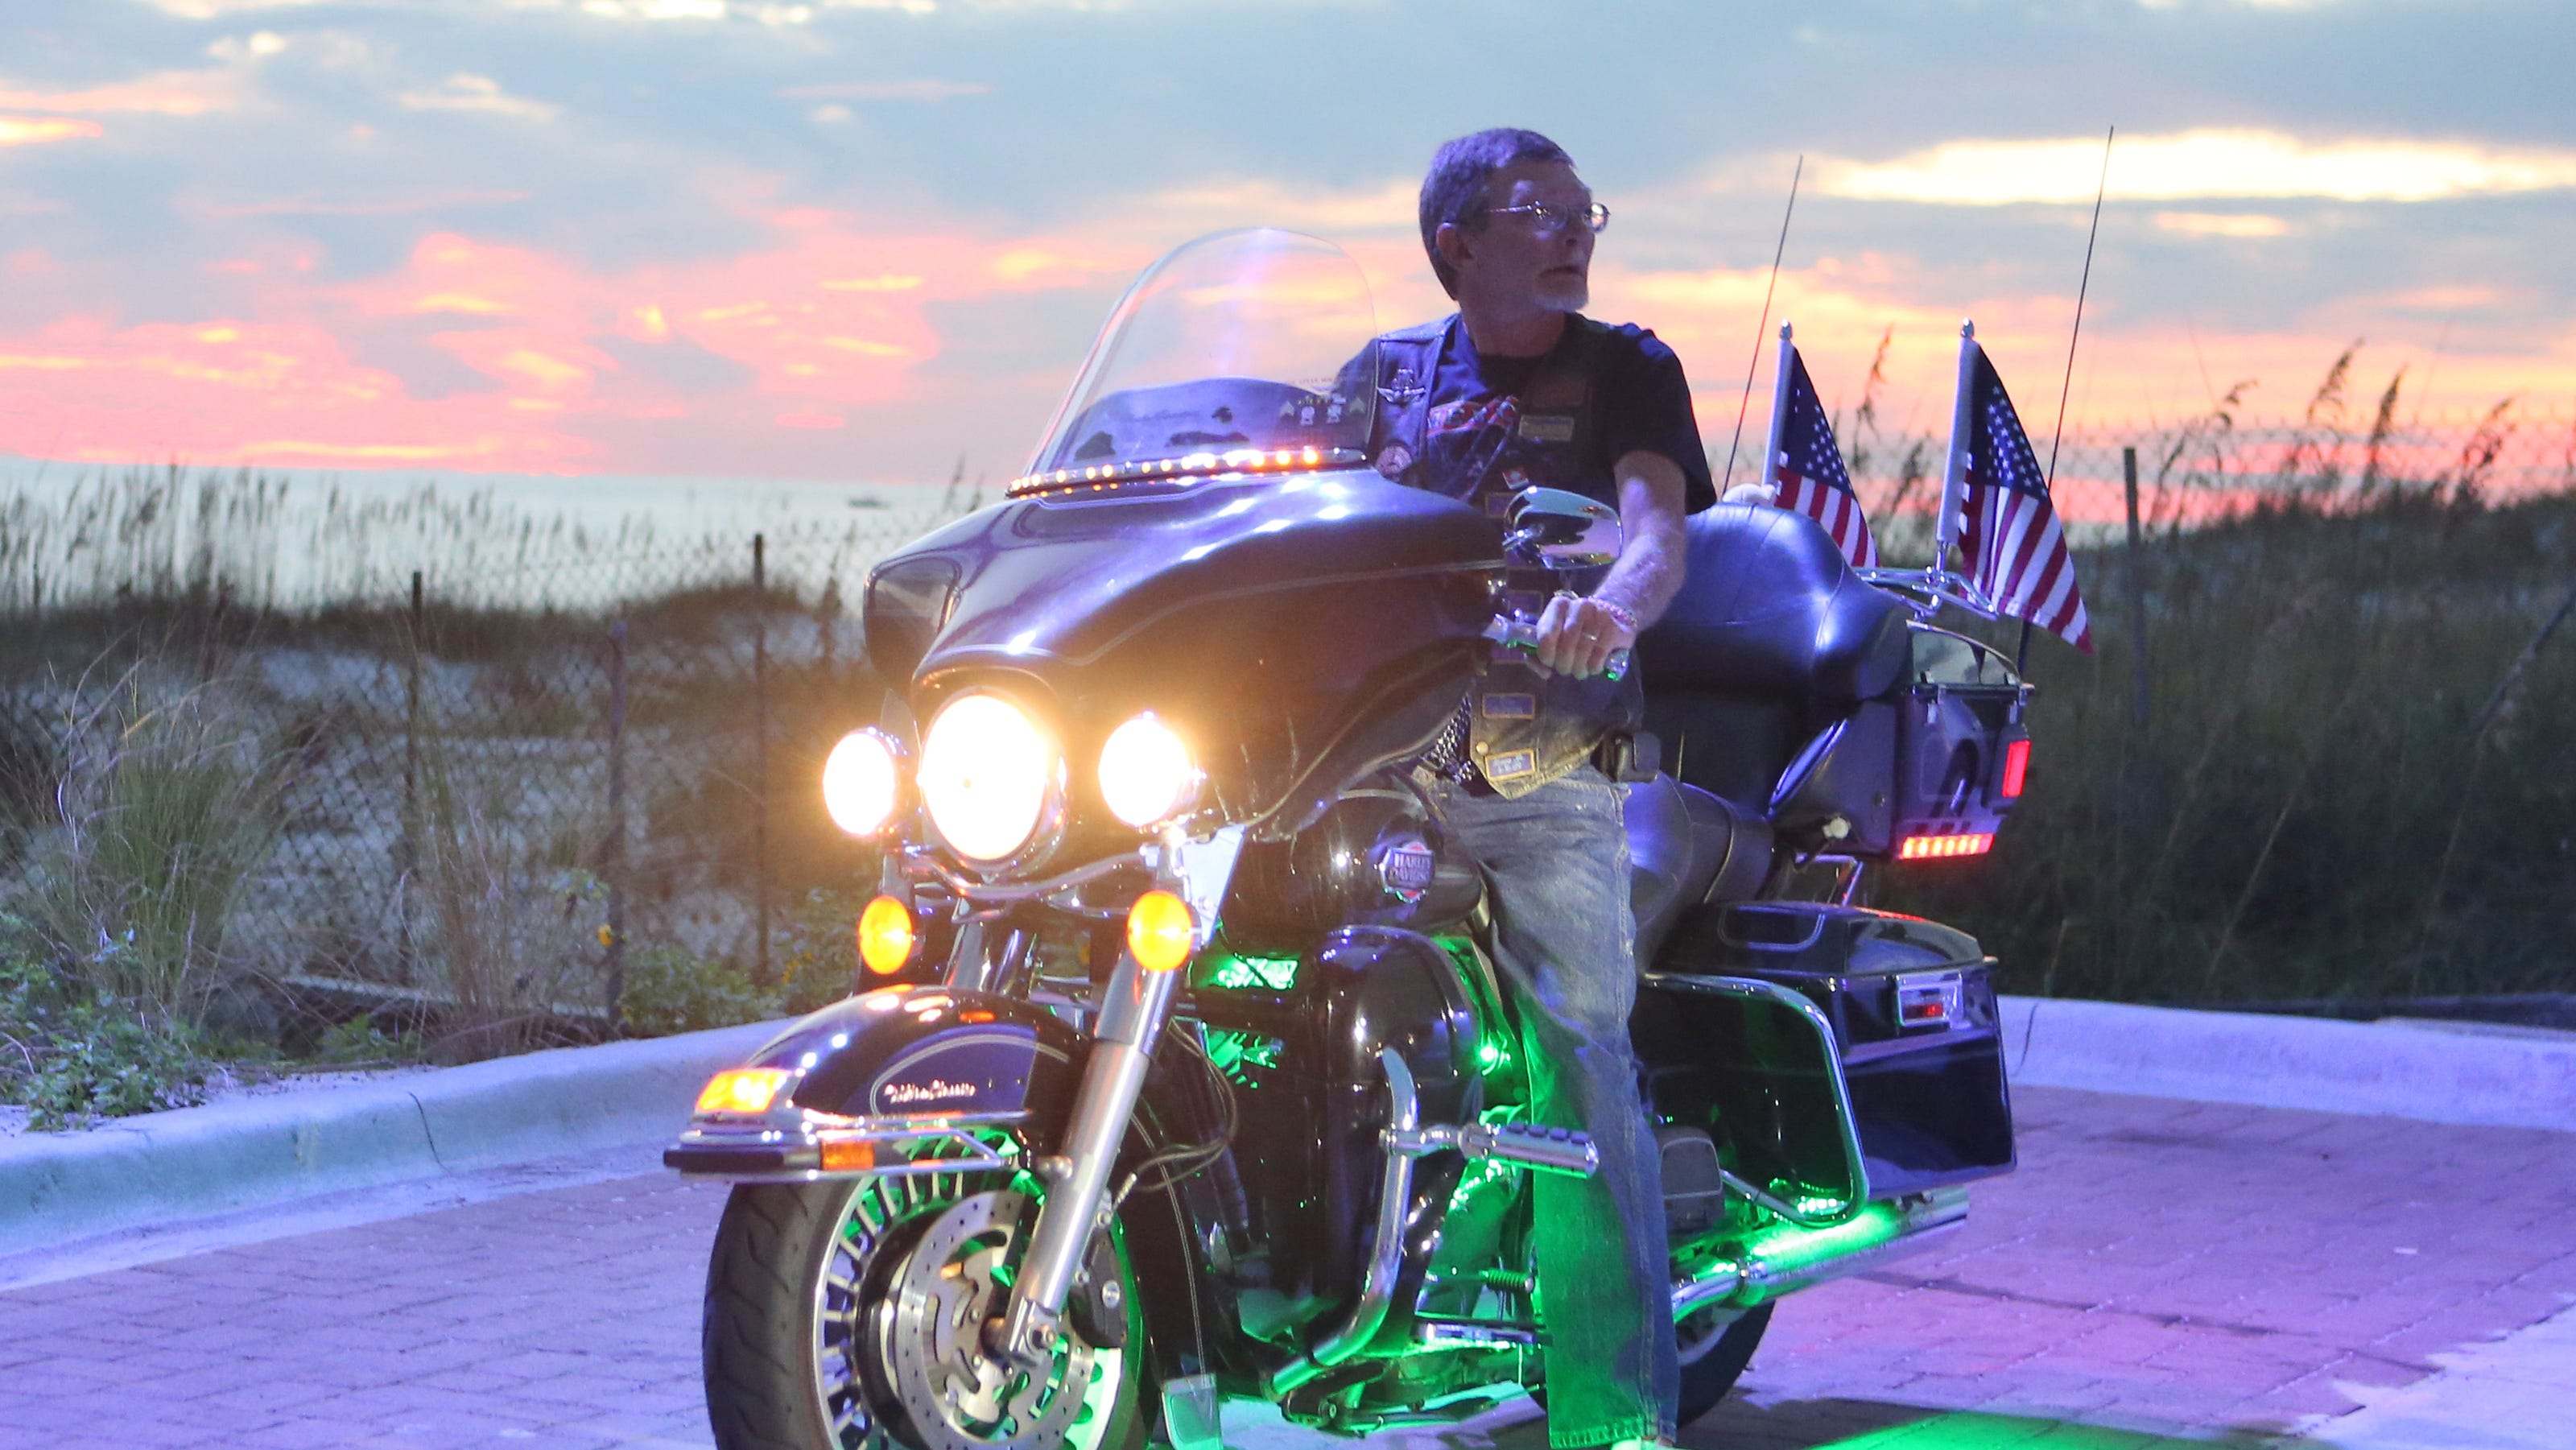 Panama City Beach motorcycle rally again after COVID